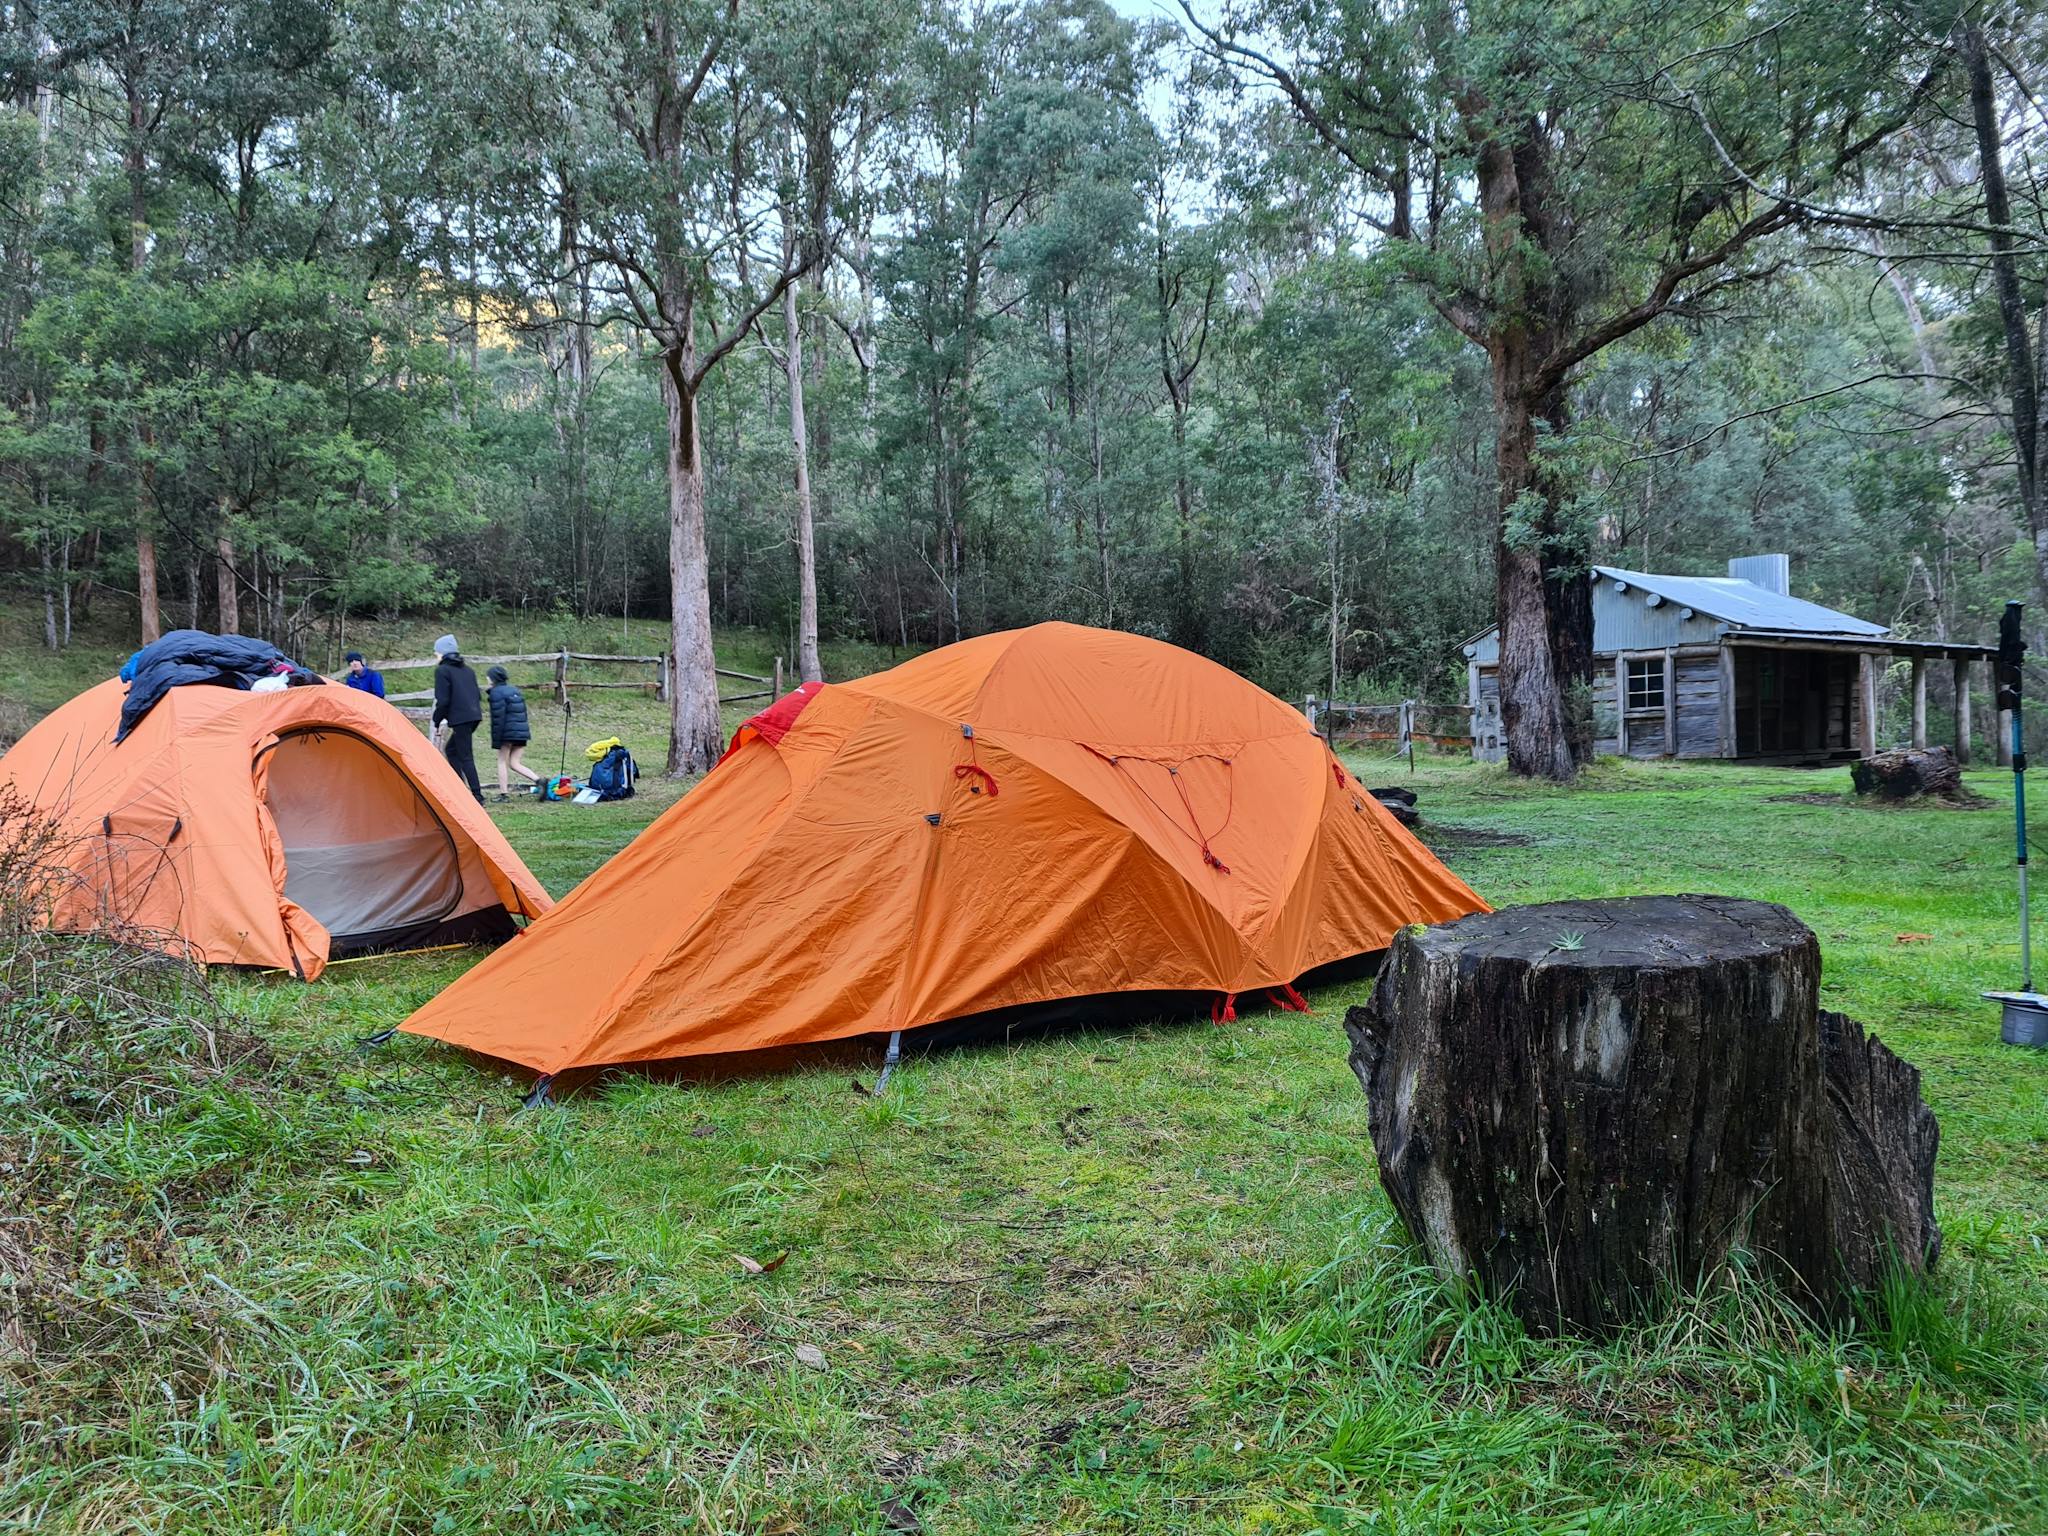 Camp set up at Ritchie's Hut.